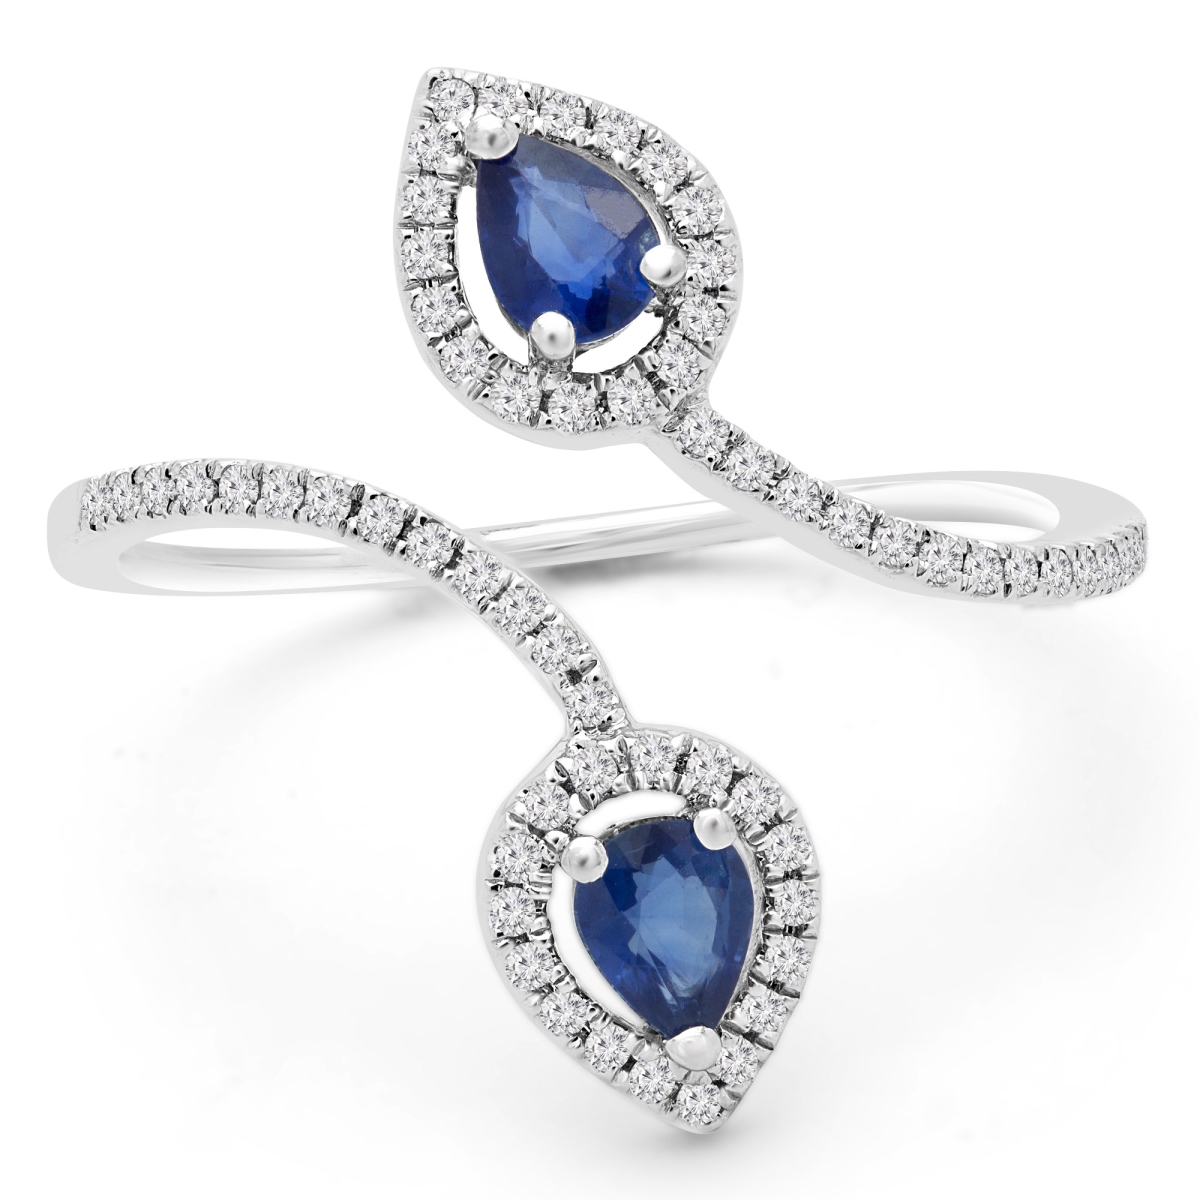 Picture of Majesty Diamonds MD190321-P 0.5 CTW Round Blue Sapphire Two Stone Pear Halo Cocktail Ring in 14K White Gold